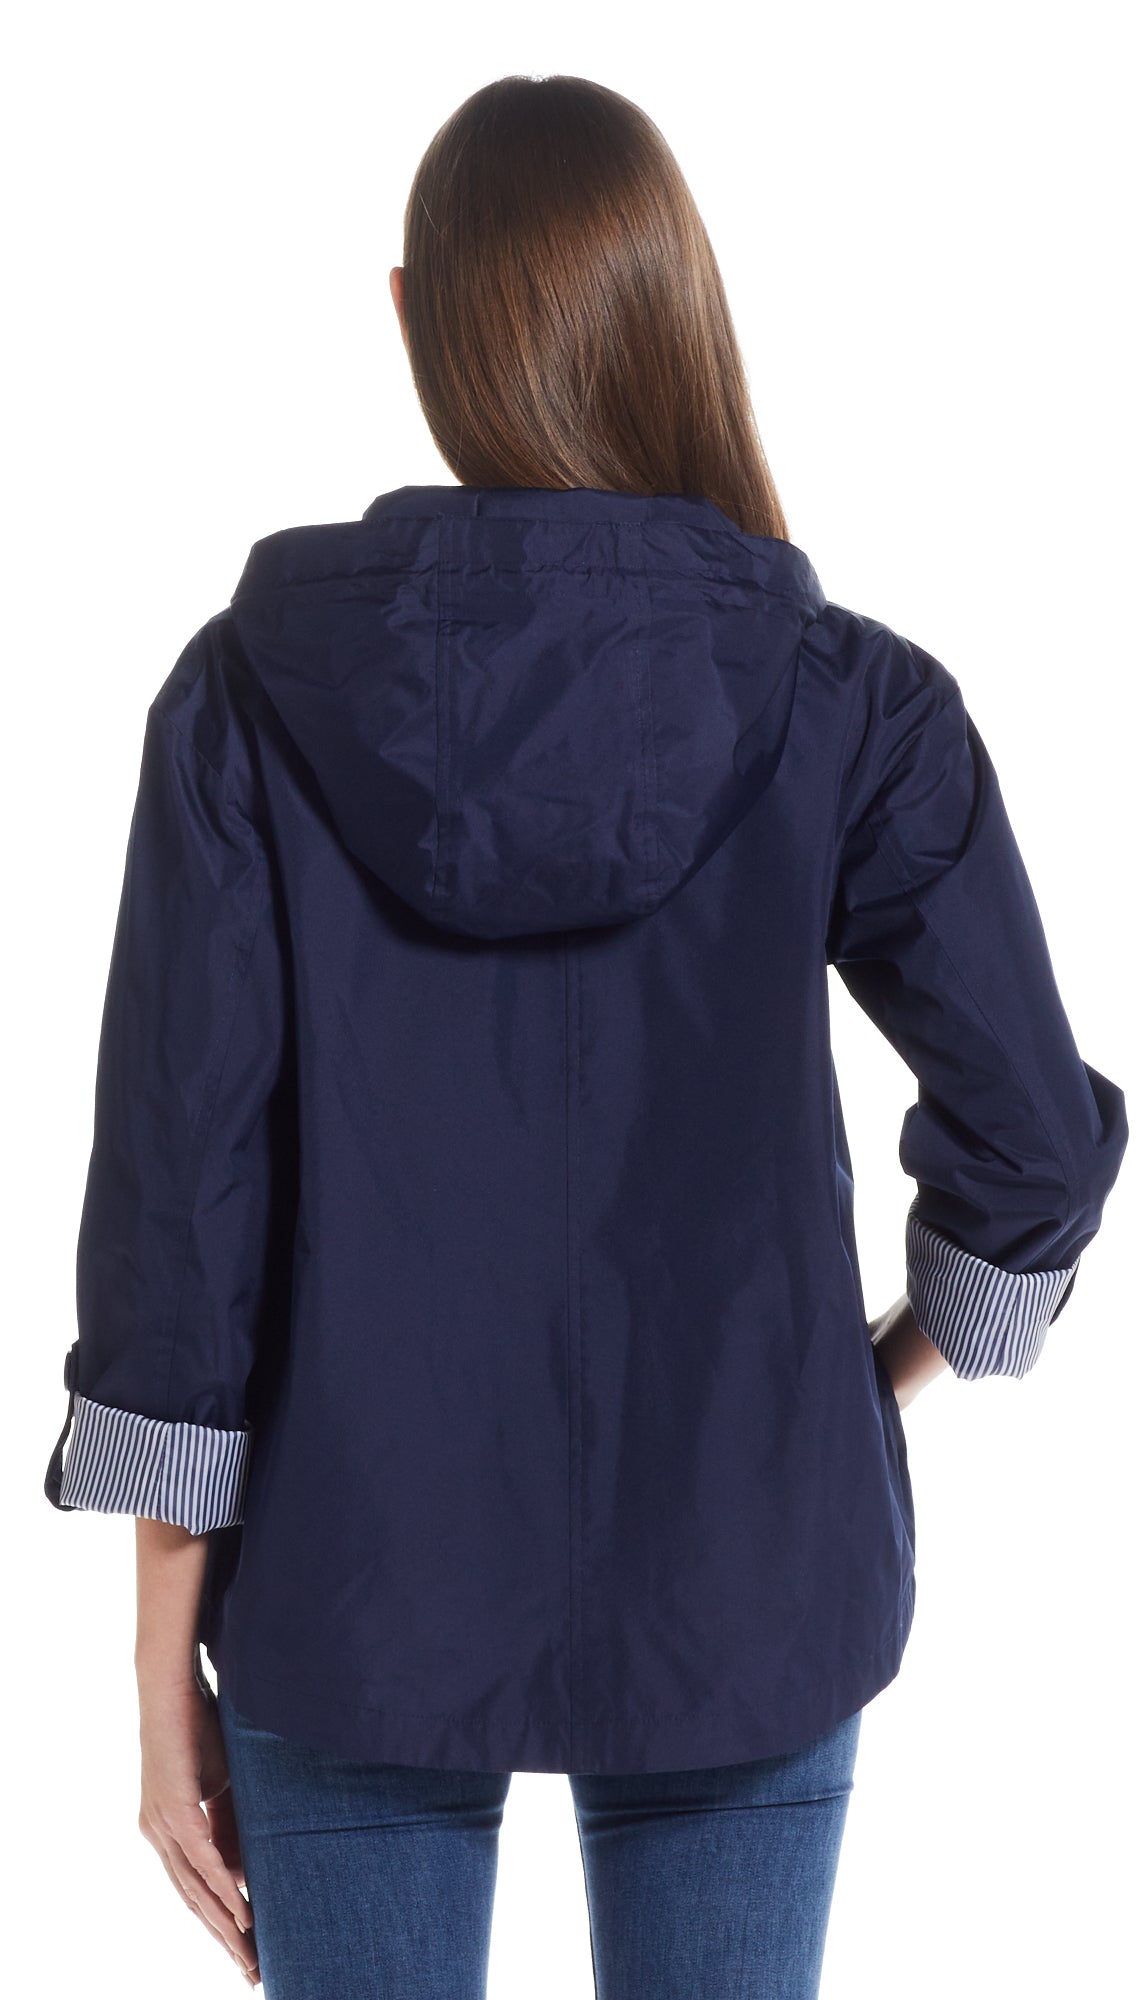 HOODED JACKET WITH TURN BACK SLEEVES